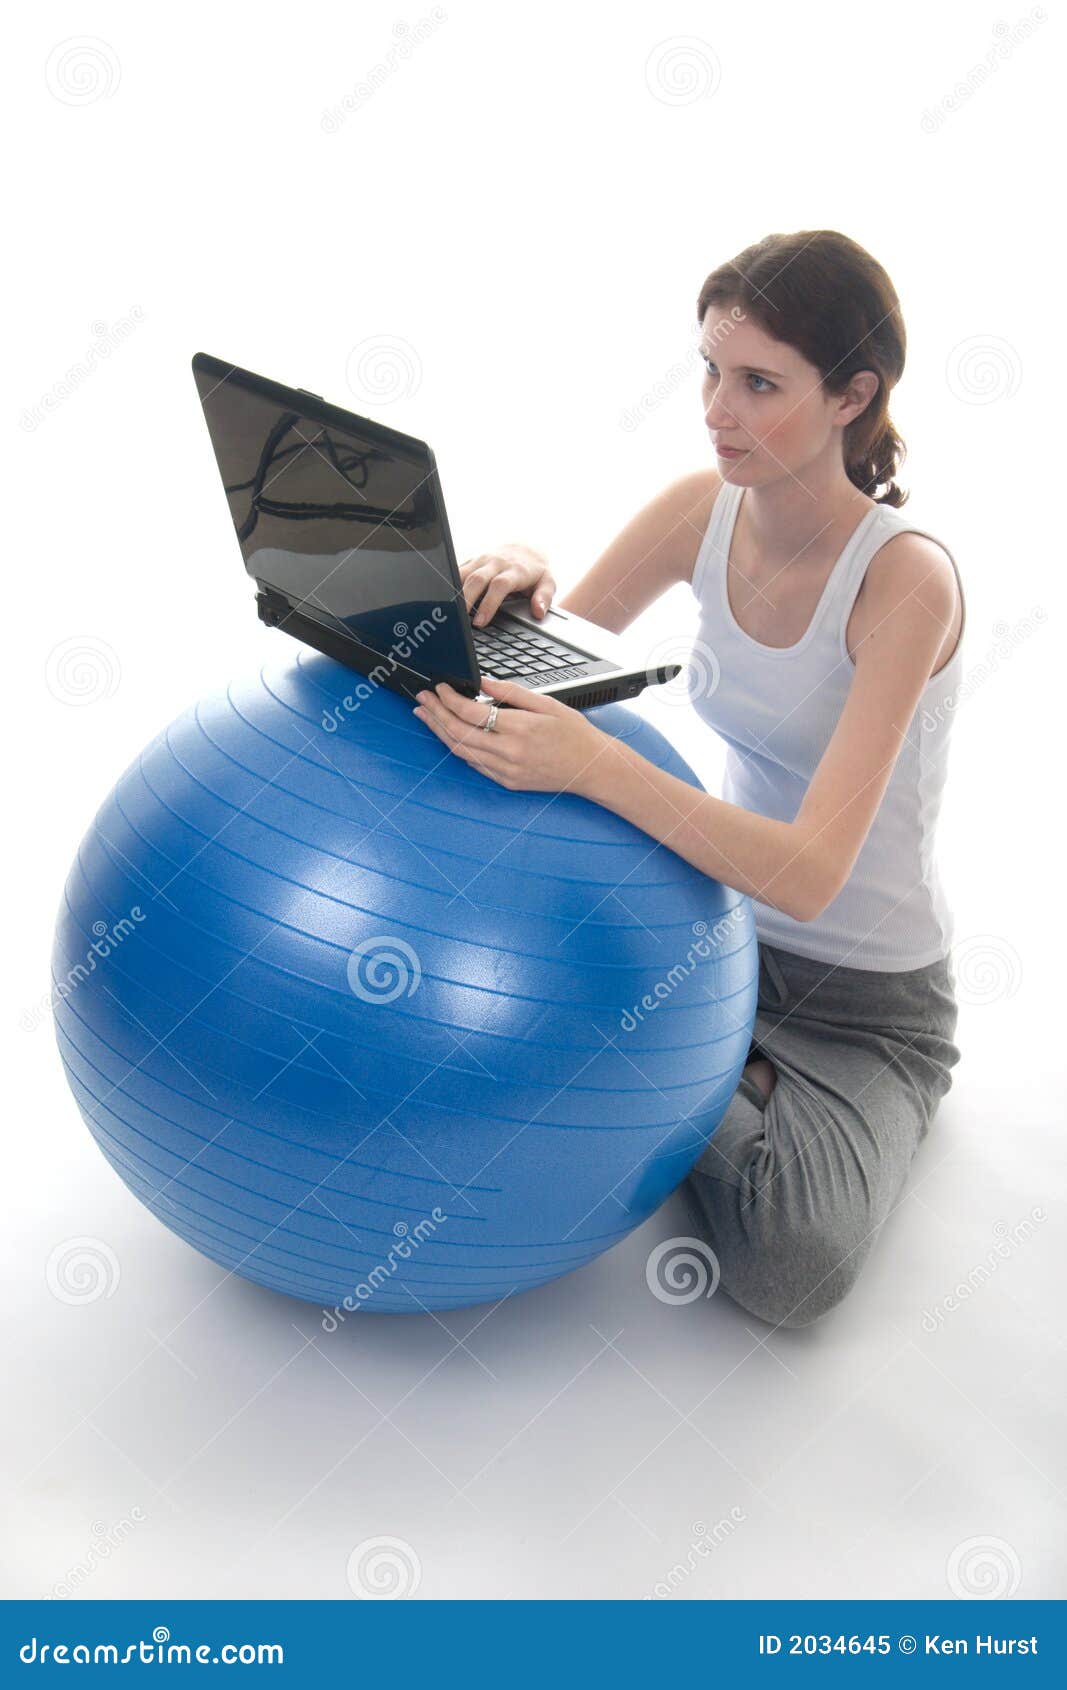 Simple Stability Ball Exercises At Desk for Women